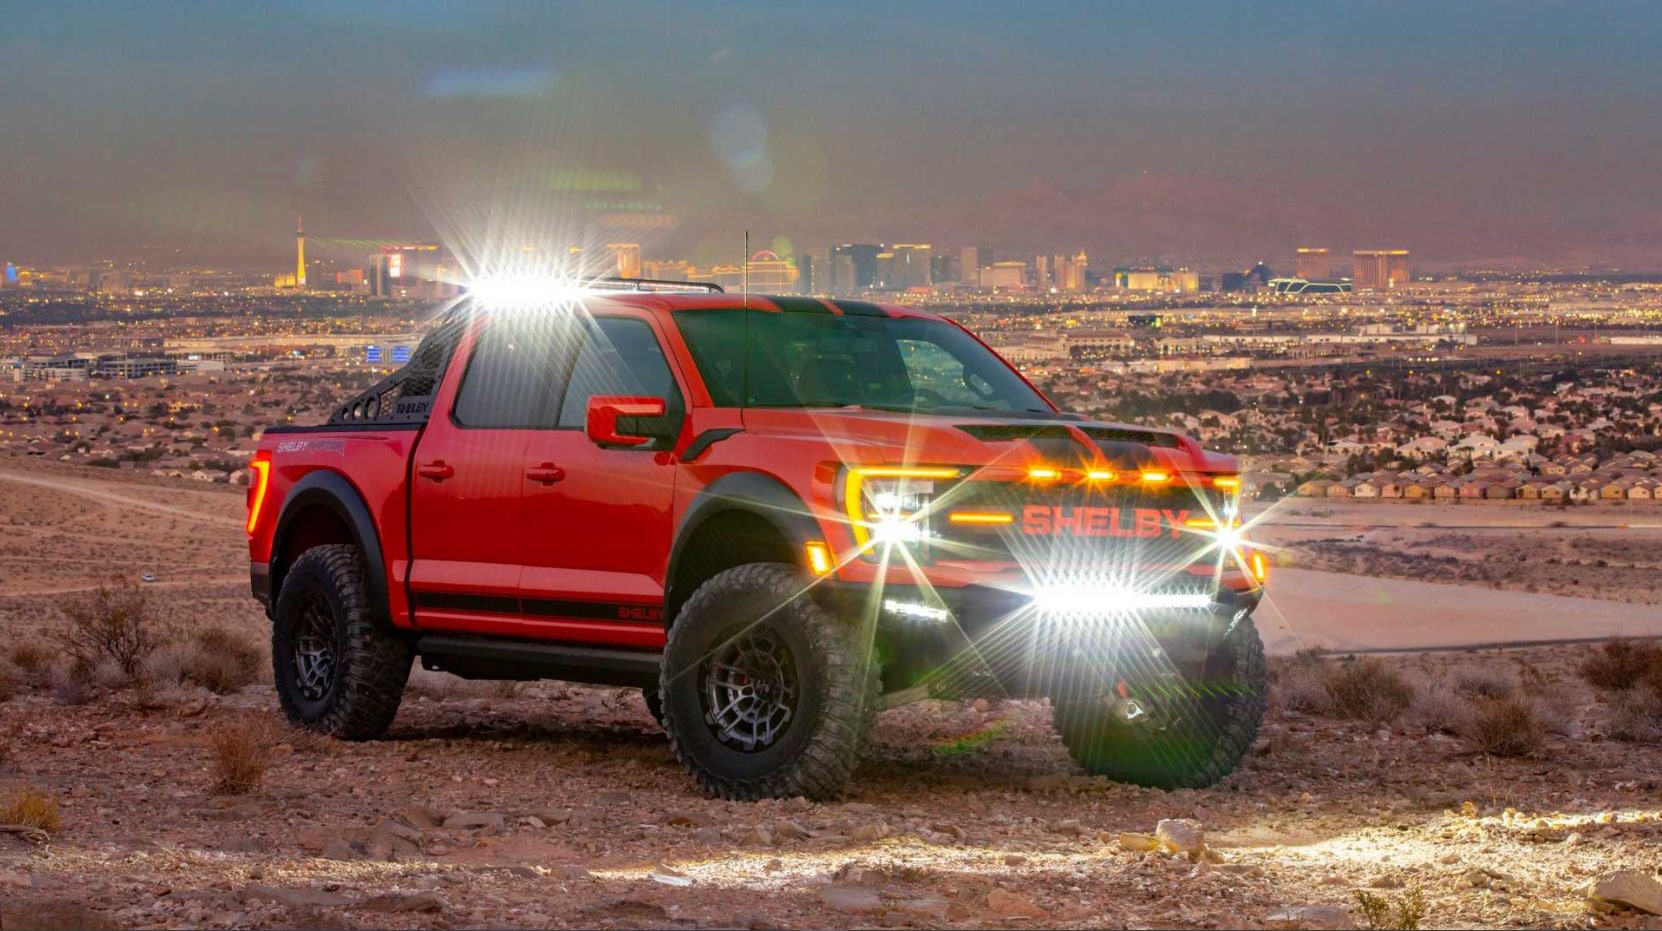 A bright red with black racing stripes 2022 Ford Shelby Baja Raptor F-150 sits parked on a hill at dusk with its lights flaring and Las Vegas in the background